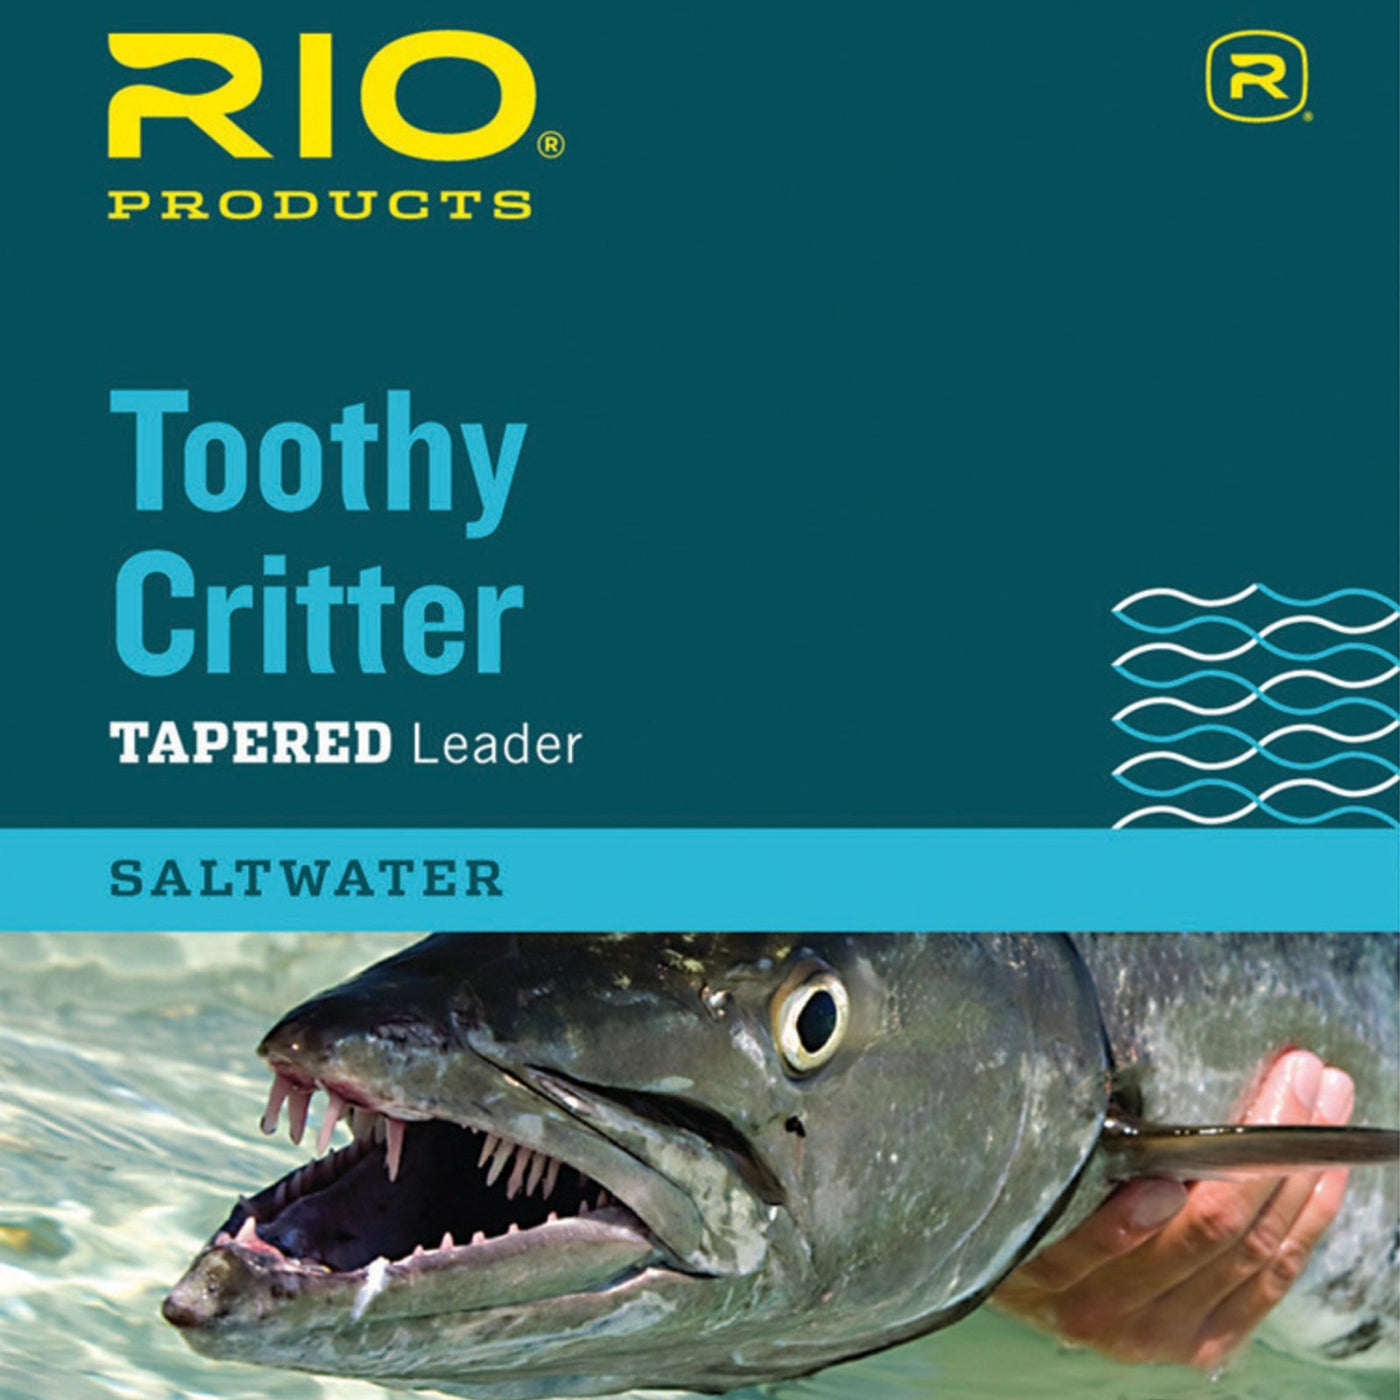 RIO Toothy Critter Leaders